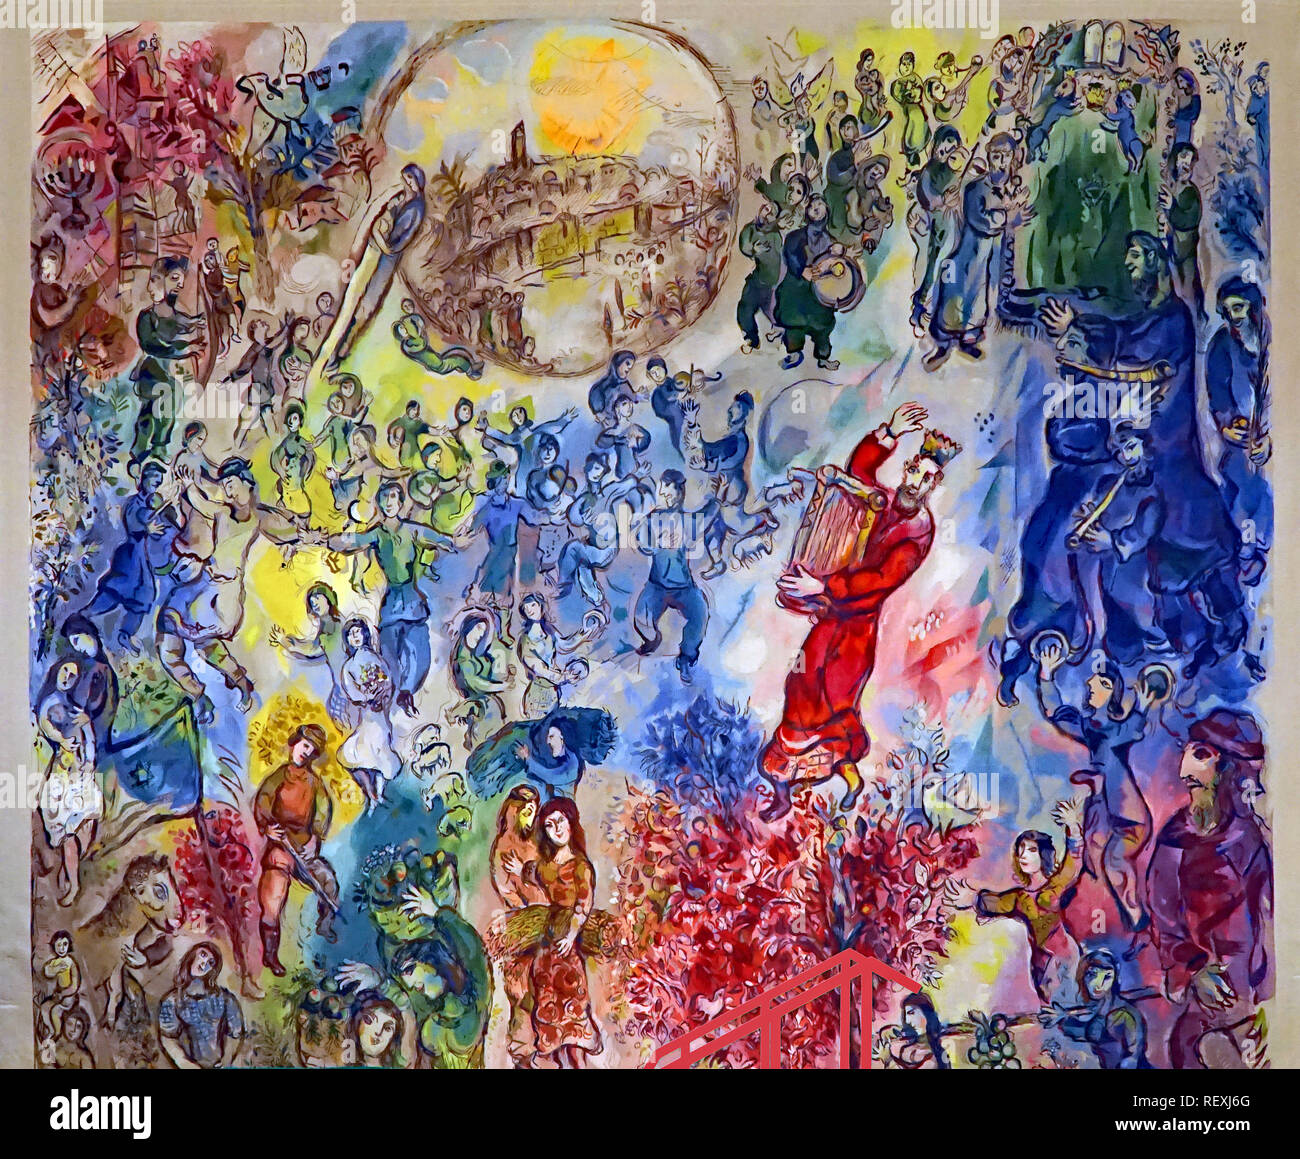 The Israeli parliament building, known as the Knesset, is decorated with huge tapestries by Marc Chagall depicting biblical scenes. Stock Photo